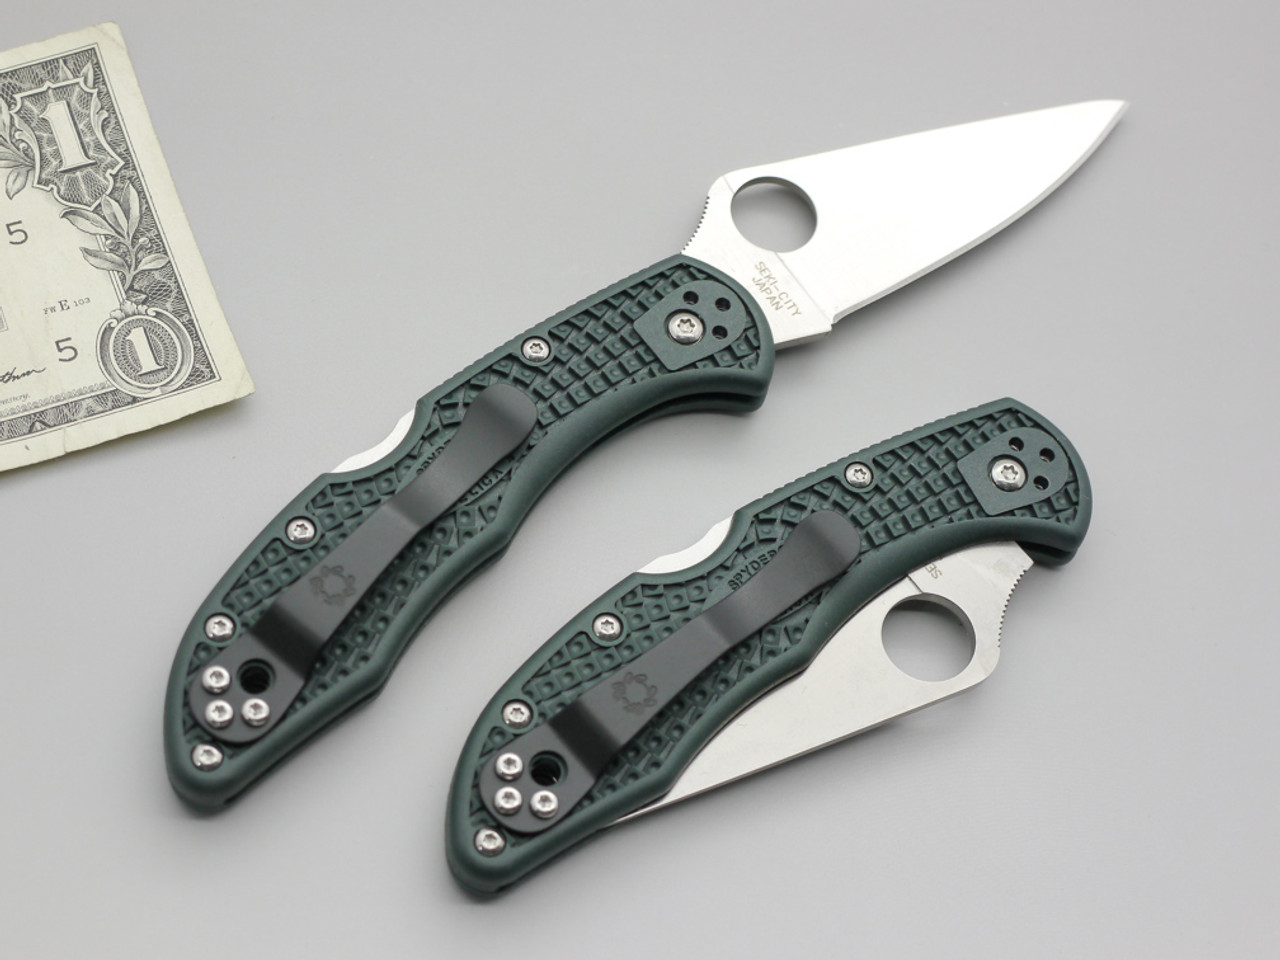 Spyderco Knives: Delica 4 ZDP-189 Stainless Steel (Flat Grind 